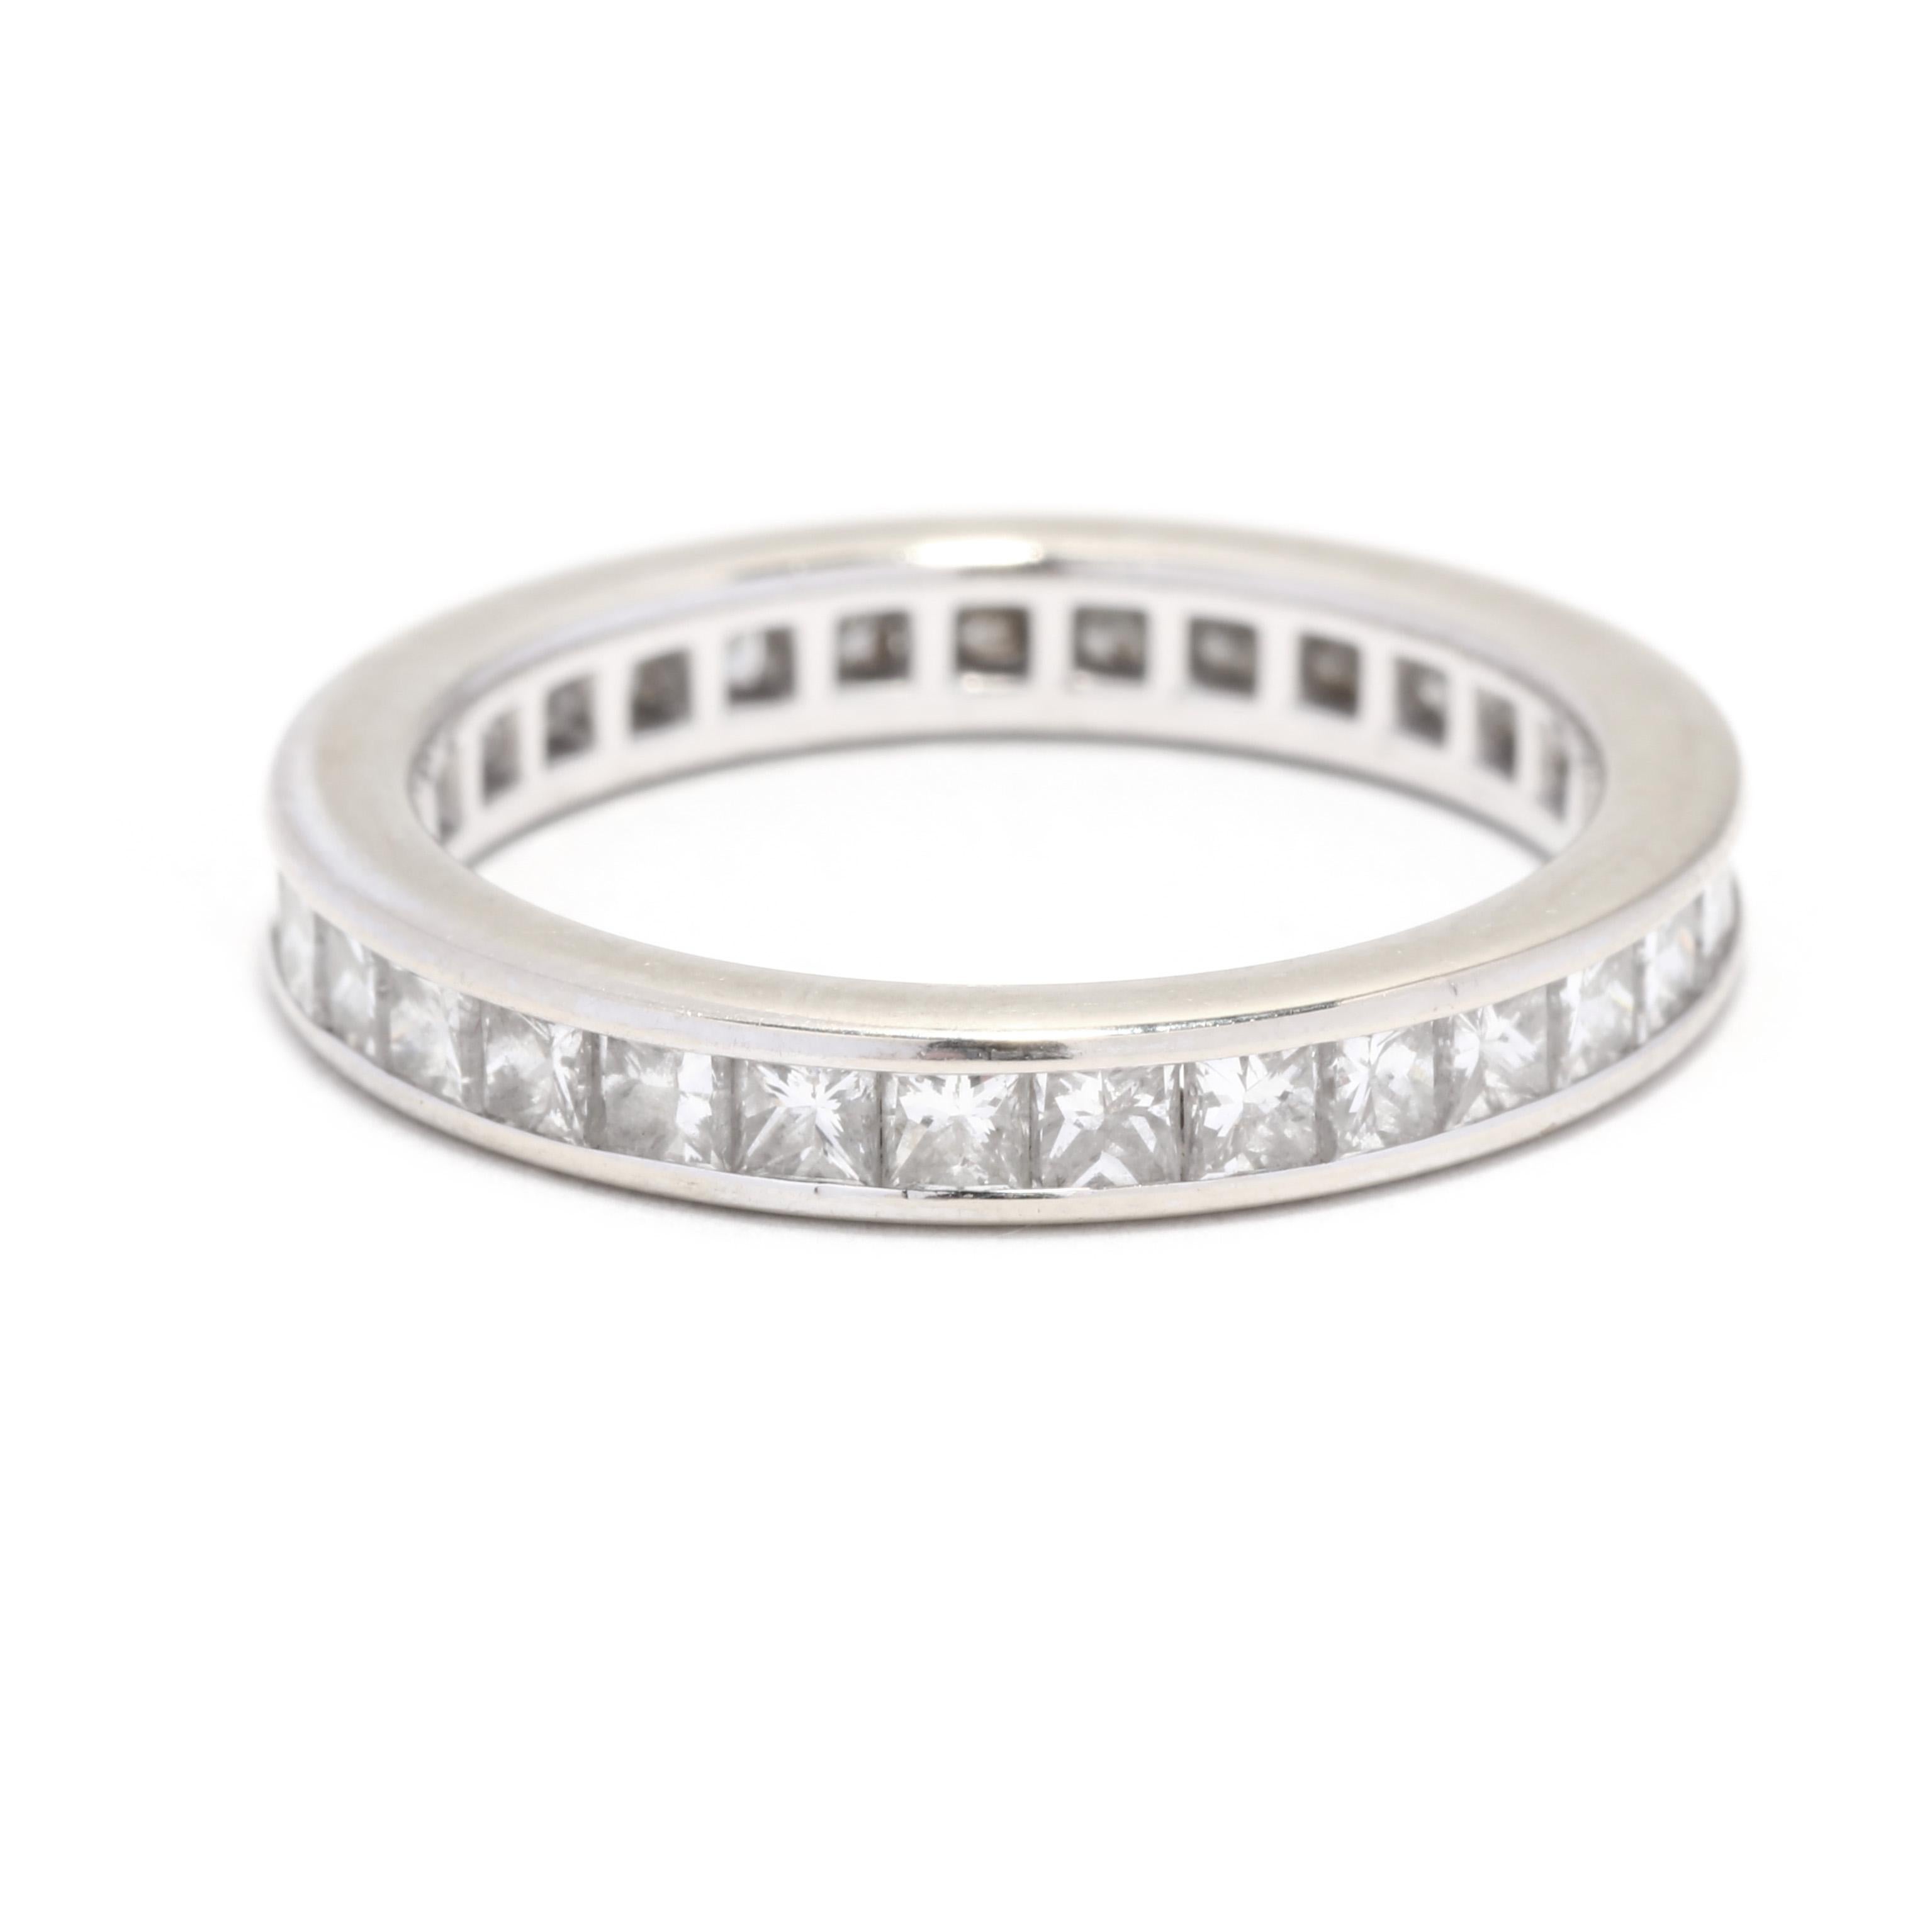 This stunning princess cut diamond eternity band is the epitome of elegance and sophistication. The band is crafted from 14k white gold and is the perfect ring size 6. With 1.54 ctw of sparkling princess cut diamonds, this ring is sure to catch the